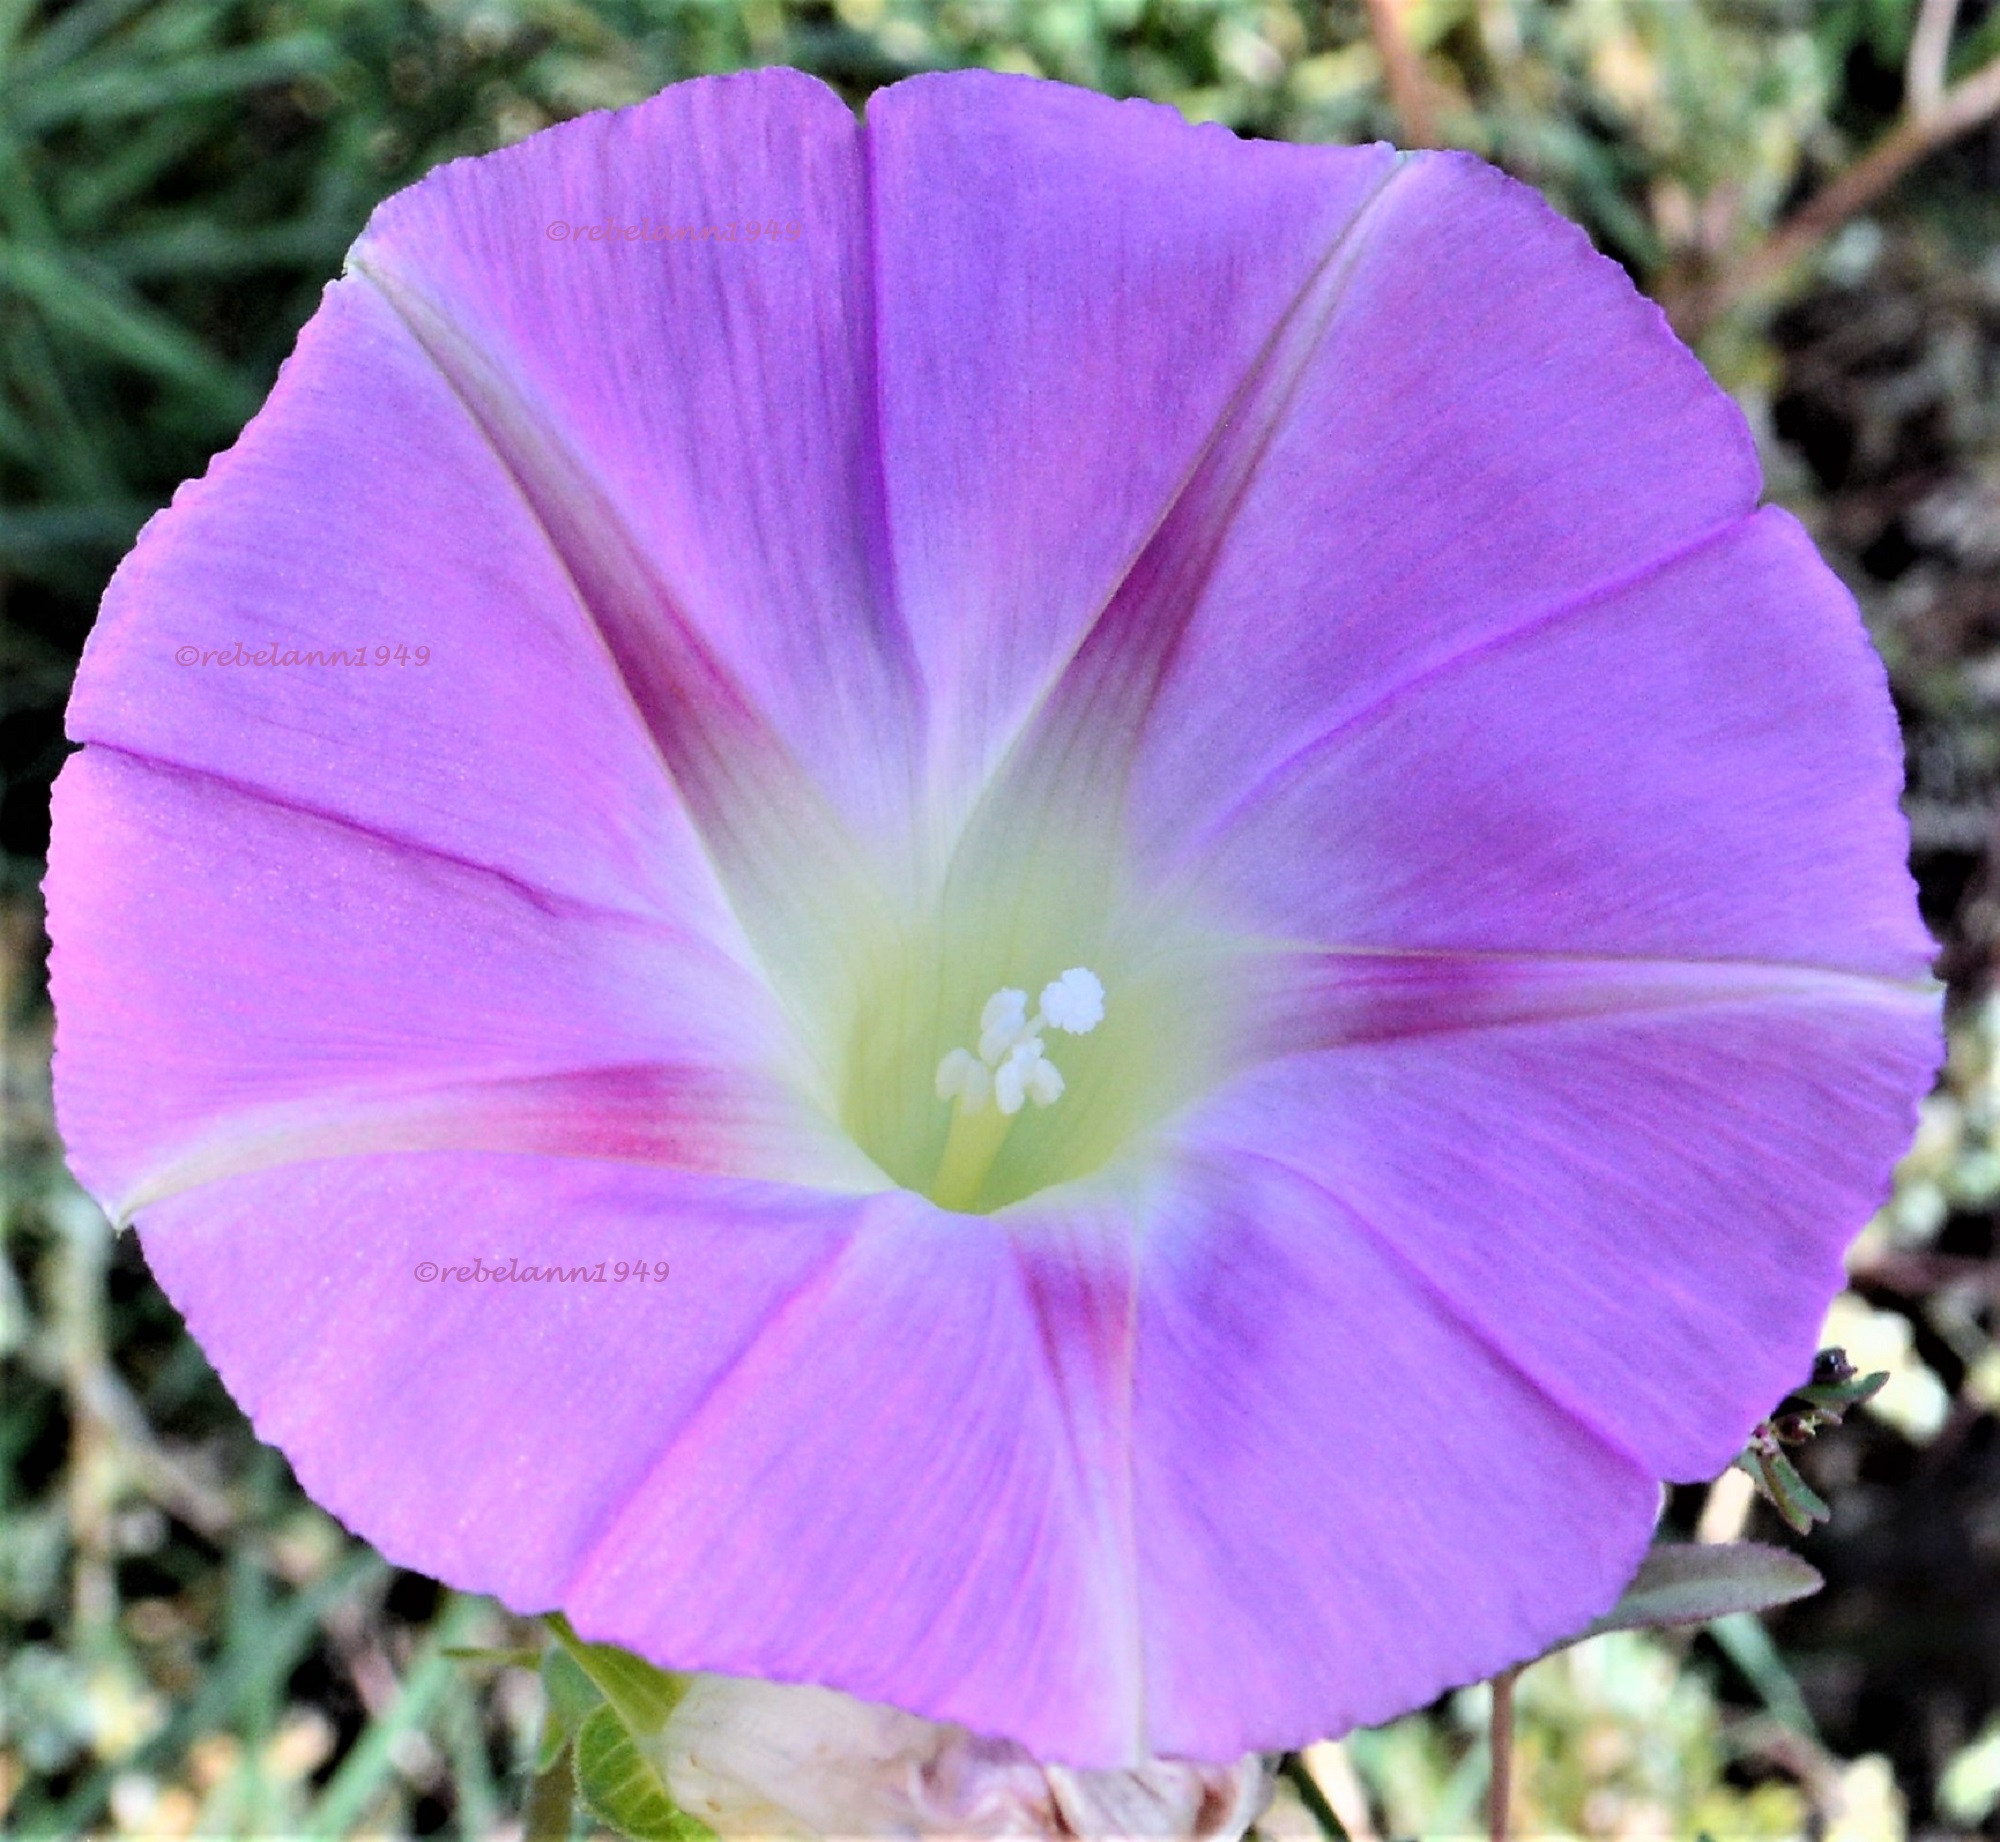 A light purple morning glory in my yard, I took this shot a few days ago.